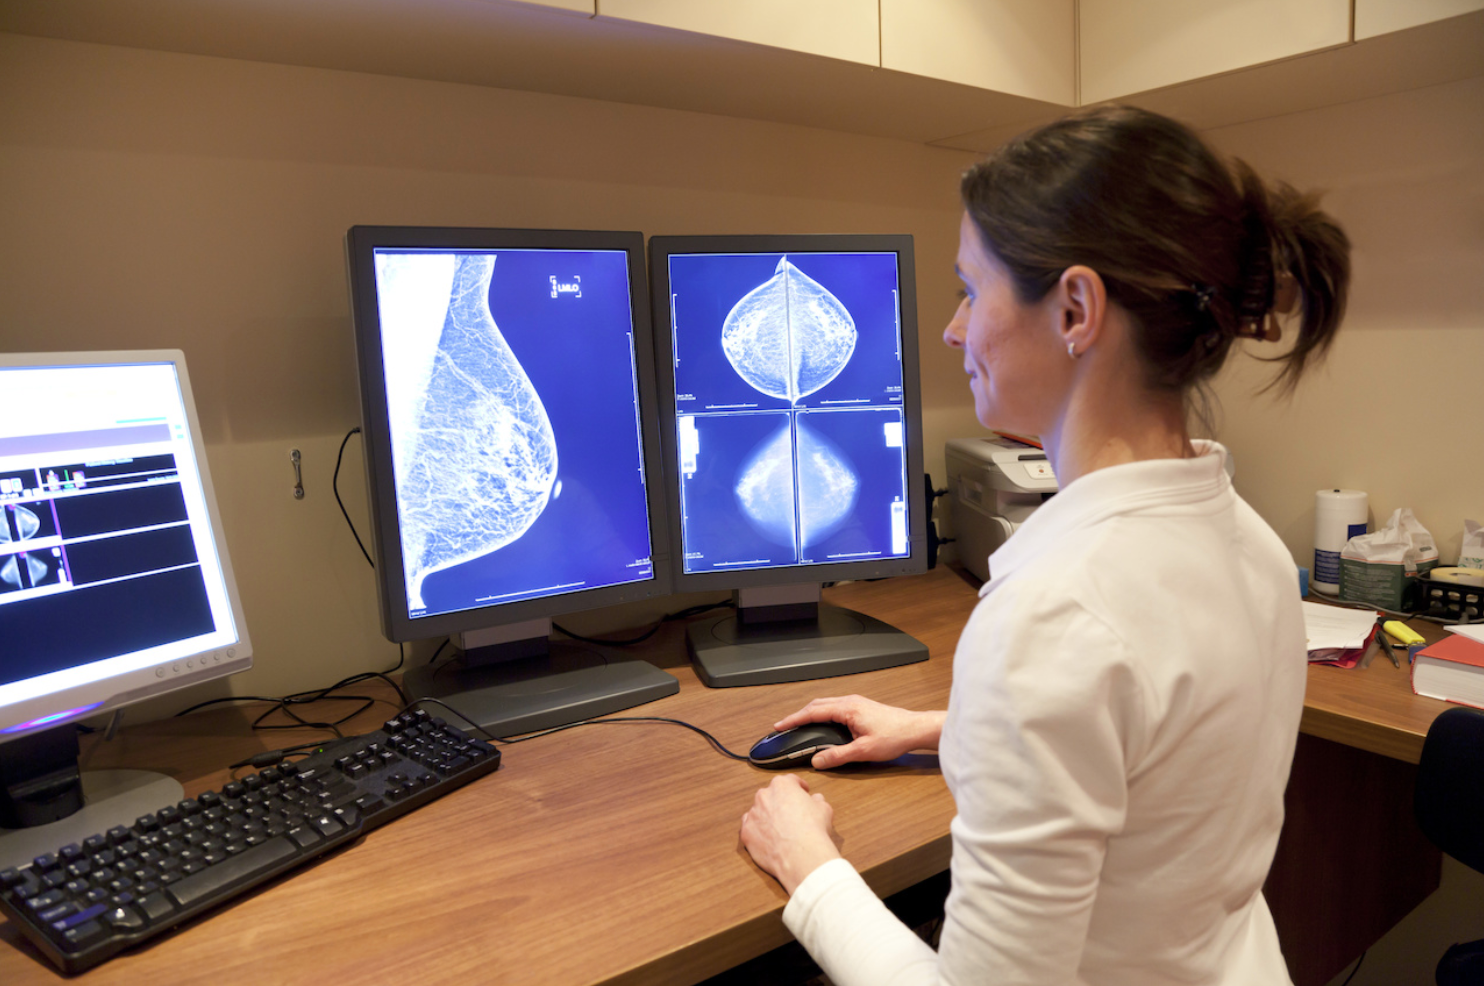 Mammography Screening Rates on the Decline Since 2009 Among Breast Cancer Survivors